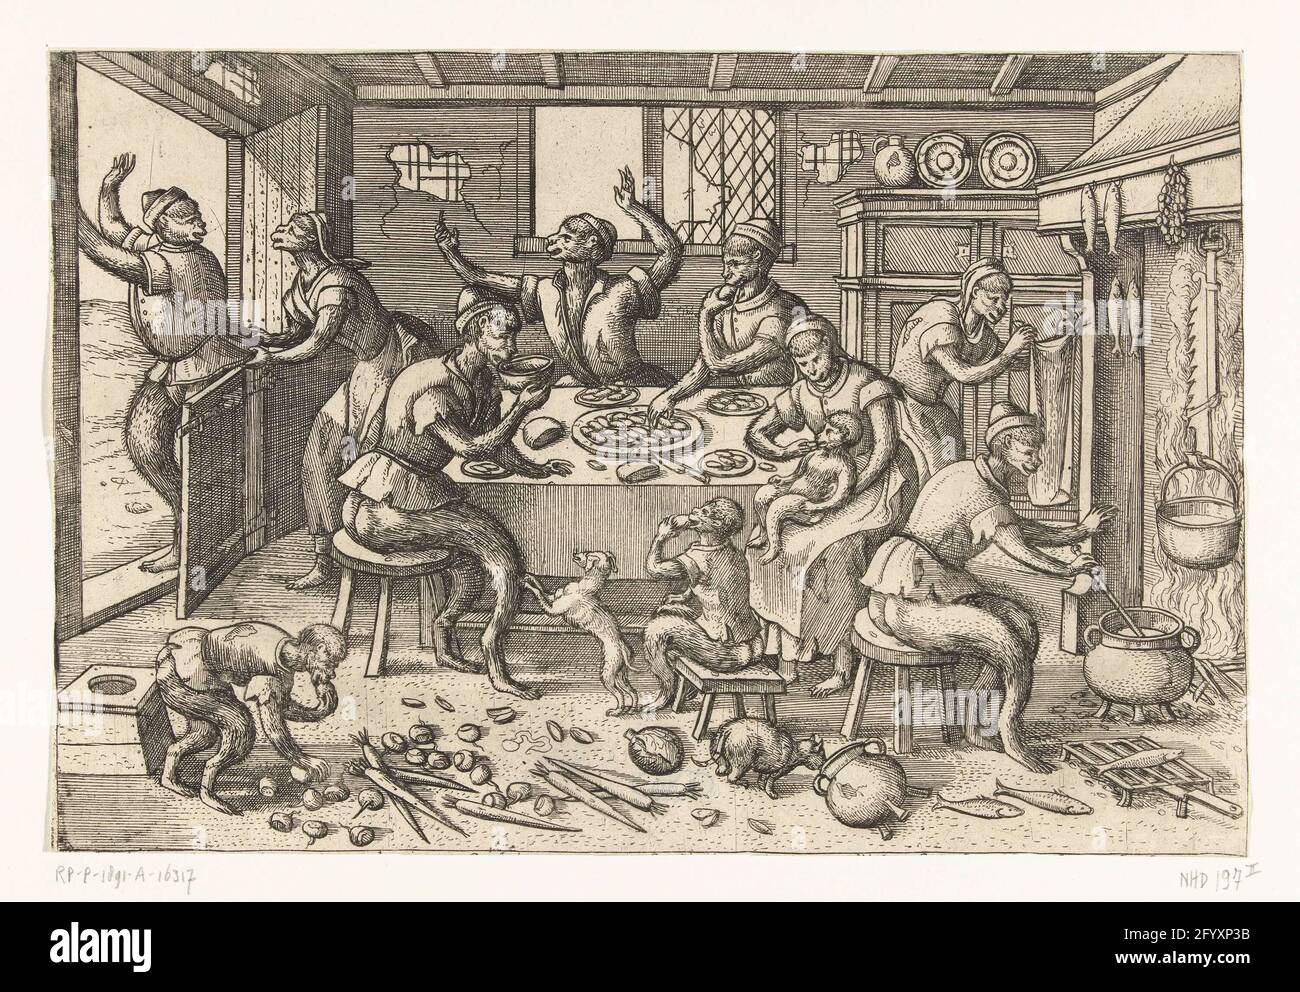 Skinny kitchen; Monkey game. A 16th-century kitchen scene. Some lean monkeys around a table are in a dilapidated house. They grab a bowl of mussels. One drinks a bowl with soup. Spread over the ground are roots, turnips and cabbage, vegetables for the poor. Fish smokes above the hearth, also arm food. A fat monkey has visited, but now tries to get away again. The poor monkeys want him to stop. Stock Photo